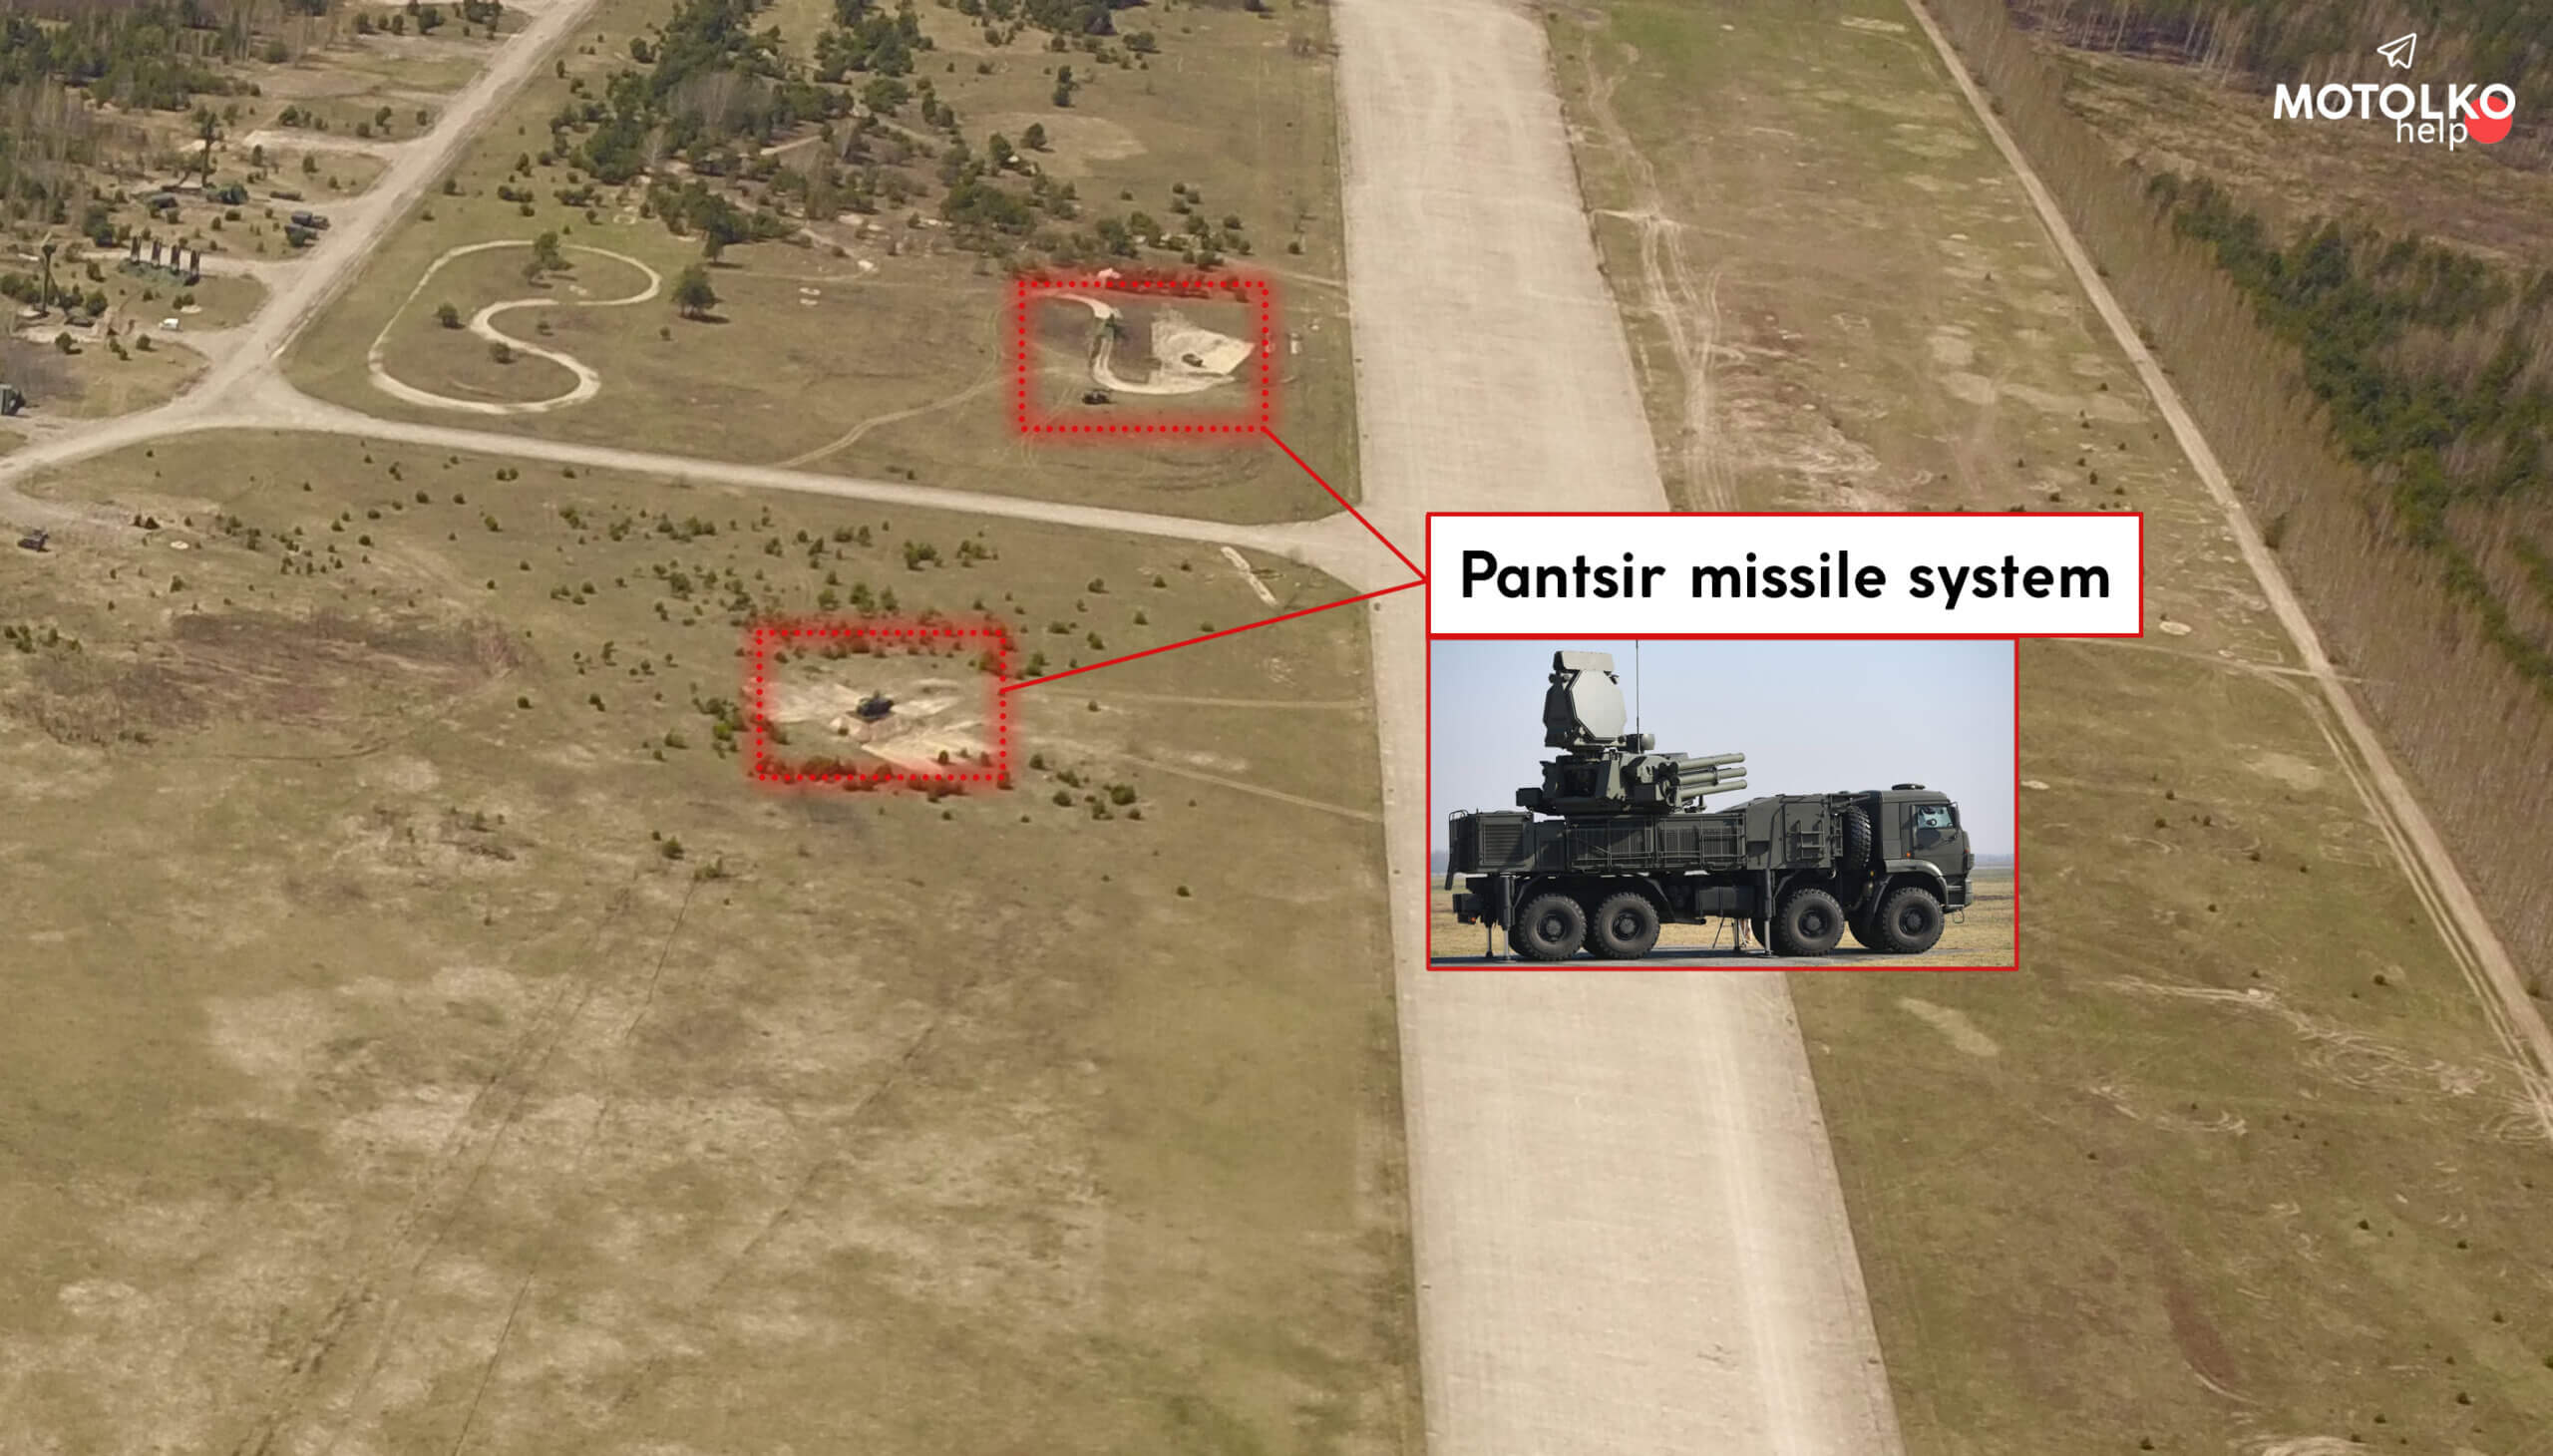 S-400, 48Ya6 Podlyot radar and Pantsir missile system. Russian troops remain stationed at the airfield in Ziabrauka